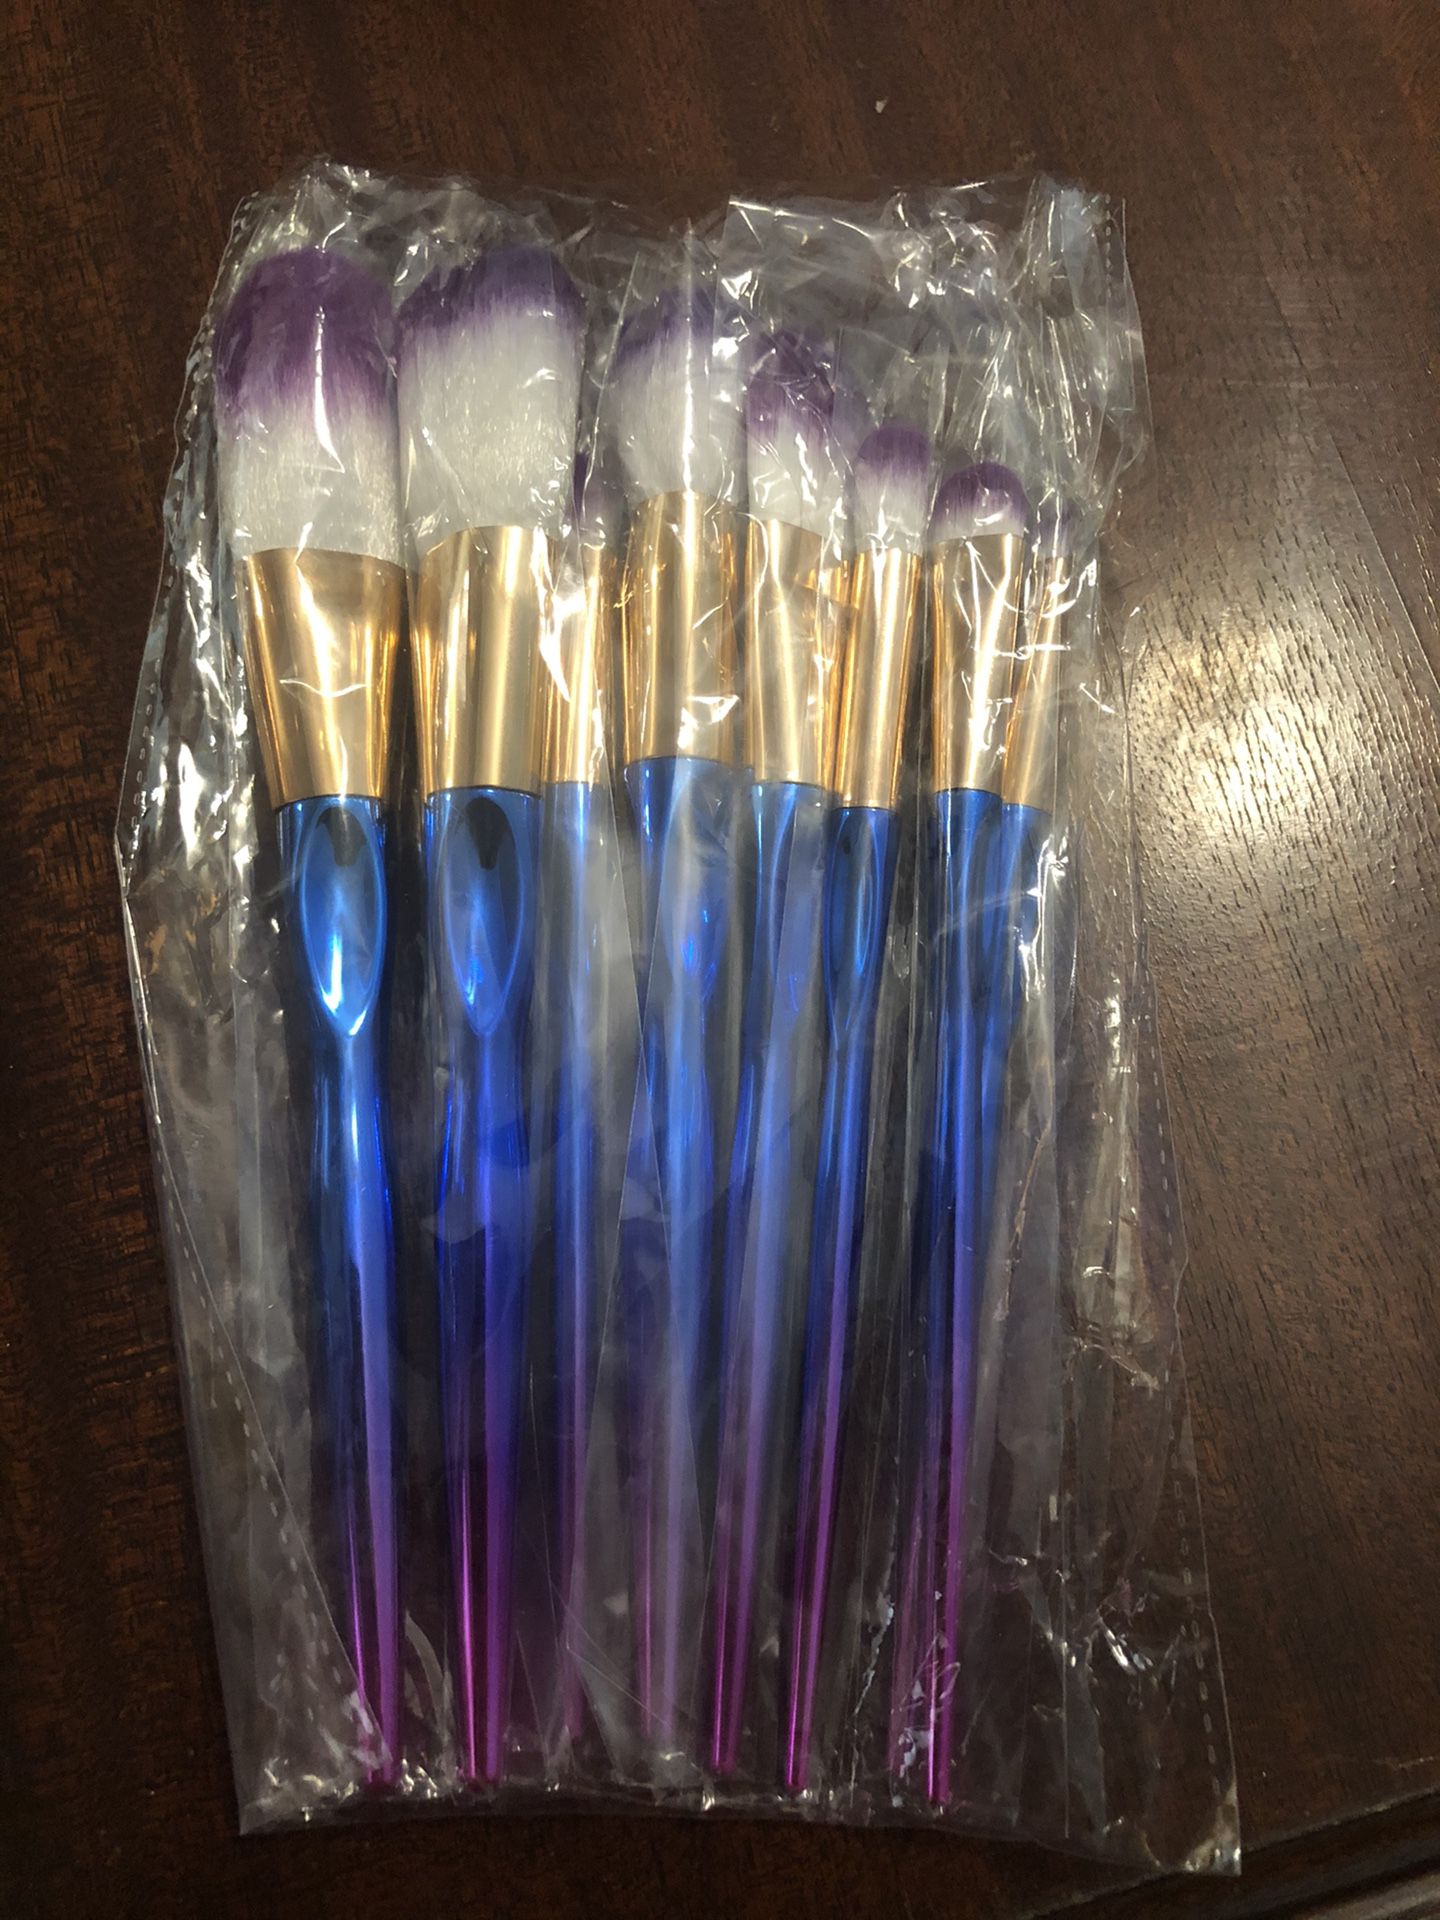 New 8 pk of makeup brushes $10